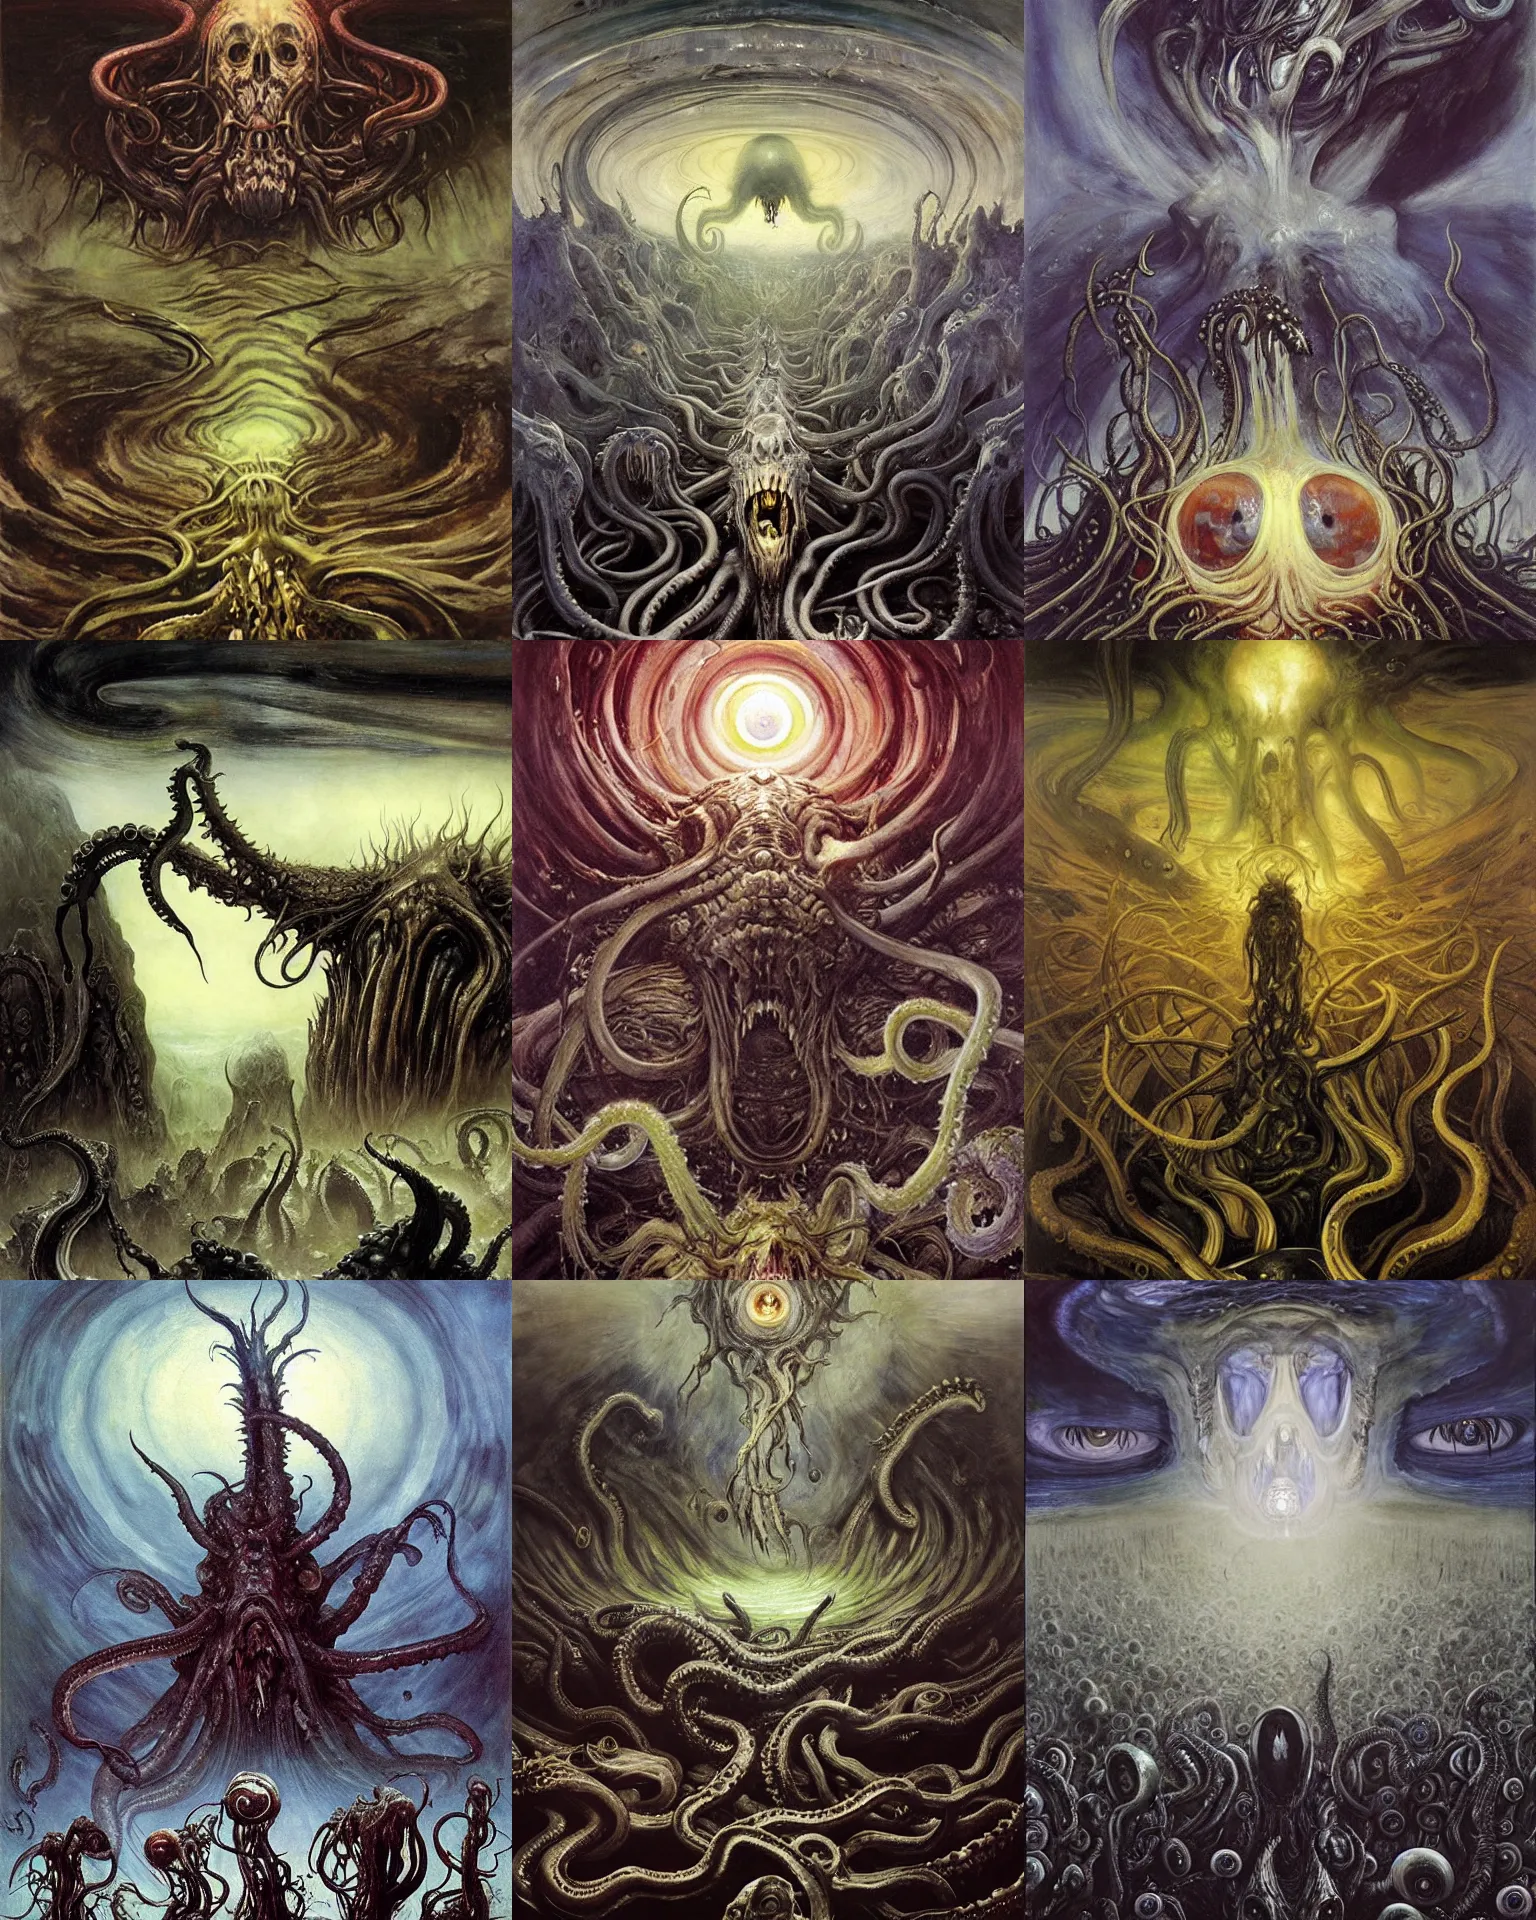 Prompt: ritual of otherworldly massive cthulu god arising a grim obsidian landscape made of giant squid eyeballs, painting by donato giancola, artgerm, edvard munch, john berkey,, hieronymus bosch, gustave dore, thomas moran, hp lovecraft, paranoid vibe, terror giant infinite eyes horror spiders tentacles maggots feeling of madness and insanity